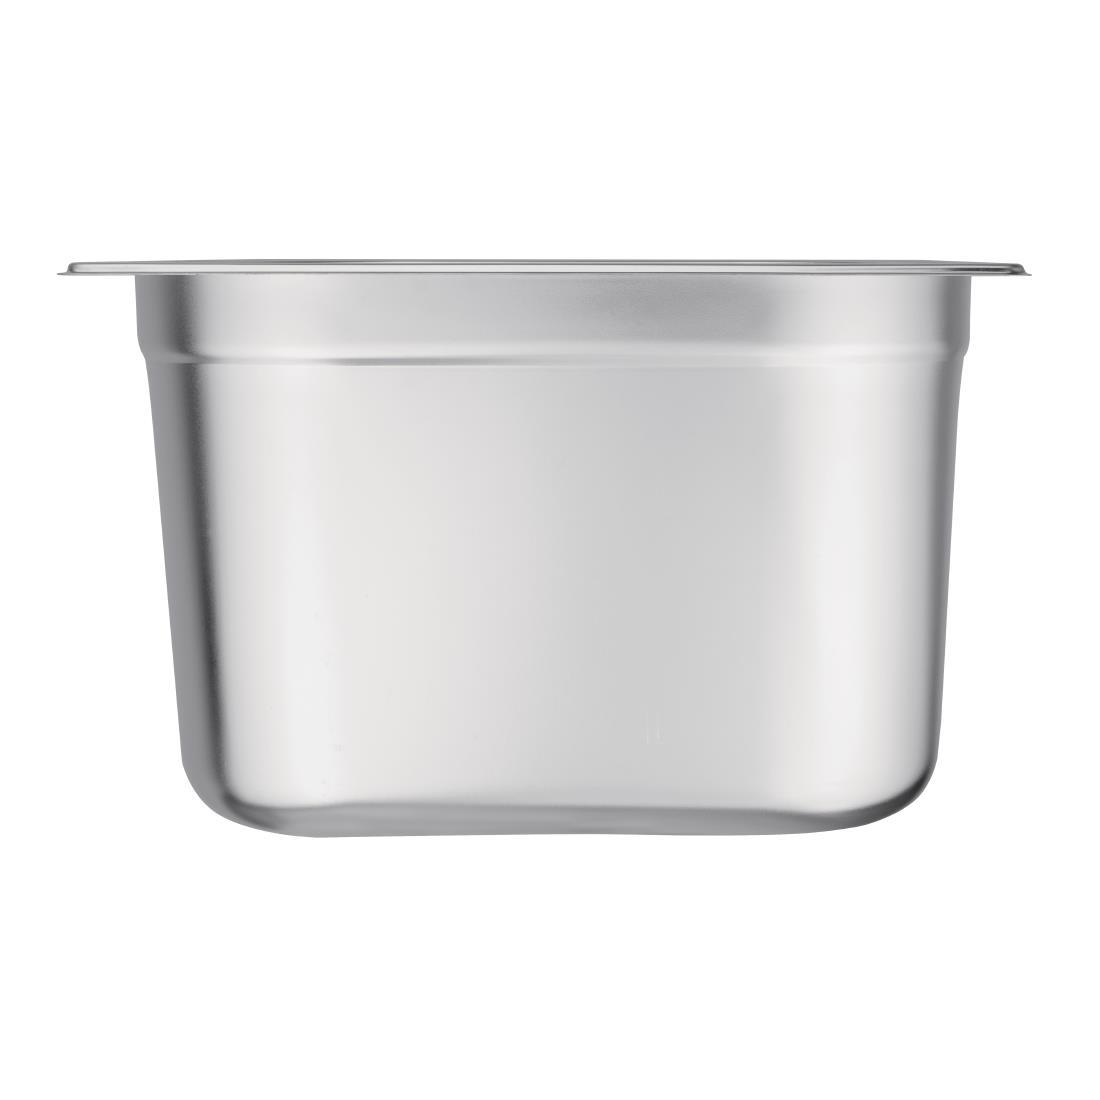 Vogue Stainless Steel 1/2 Gastronorm Pan 200mm - K932  - 5